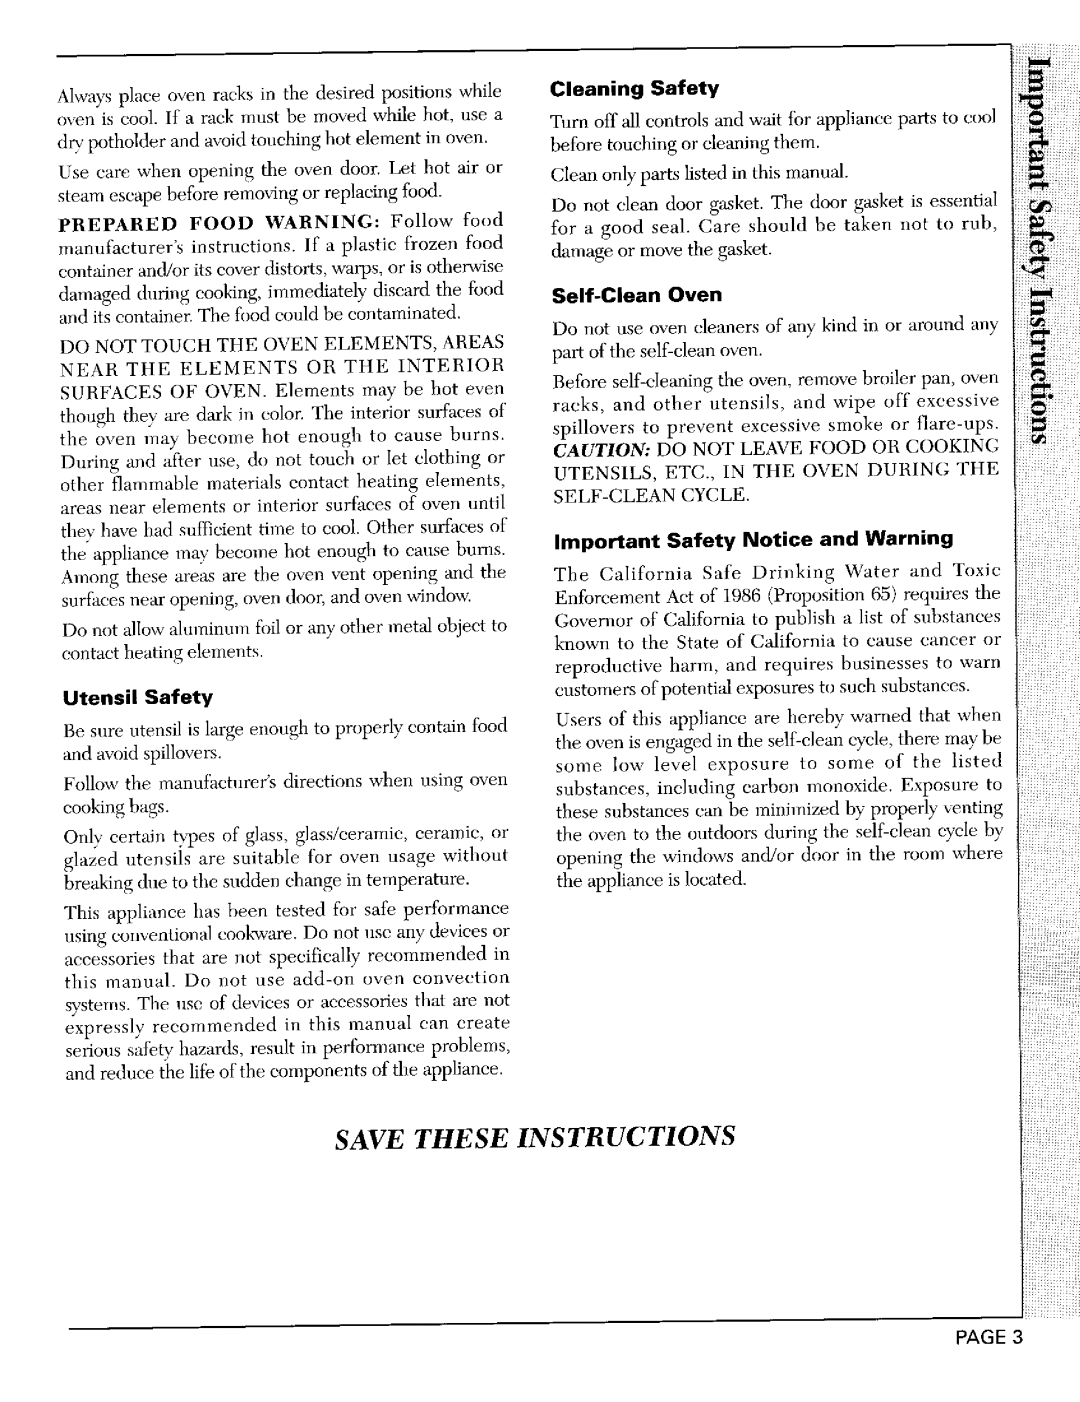 Maytag CWE9030B, CWE9030D Utensil Safety, Cleaning Safety, Self-CleanOven, Important Safety Notice and Warning 